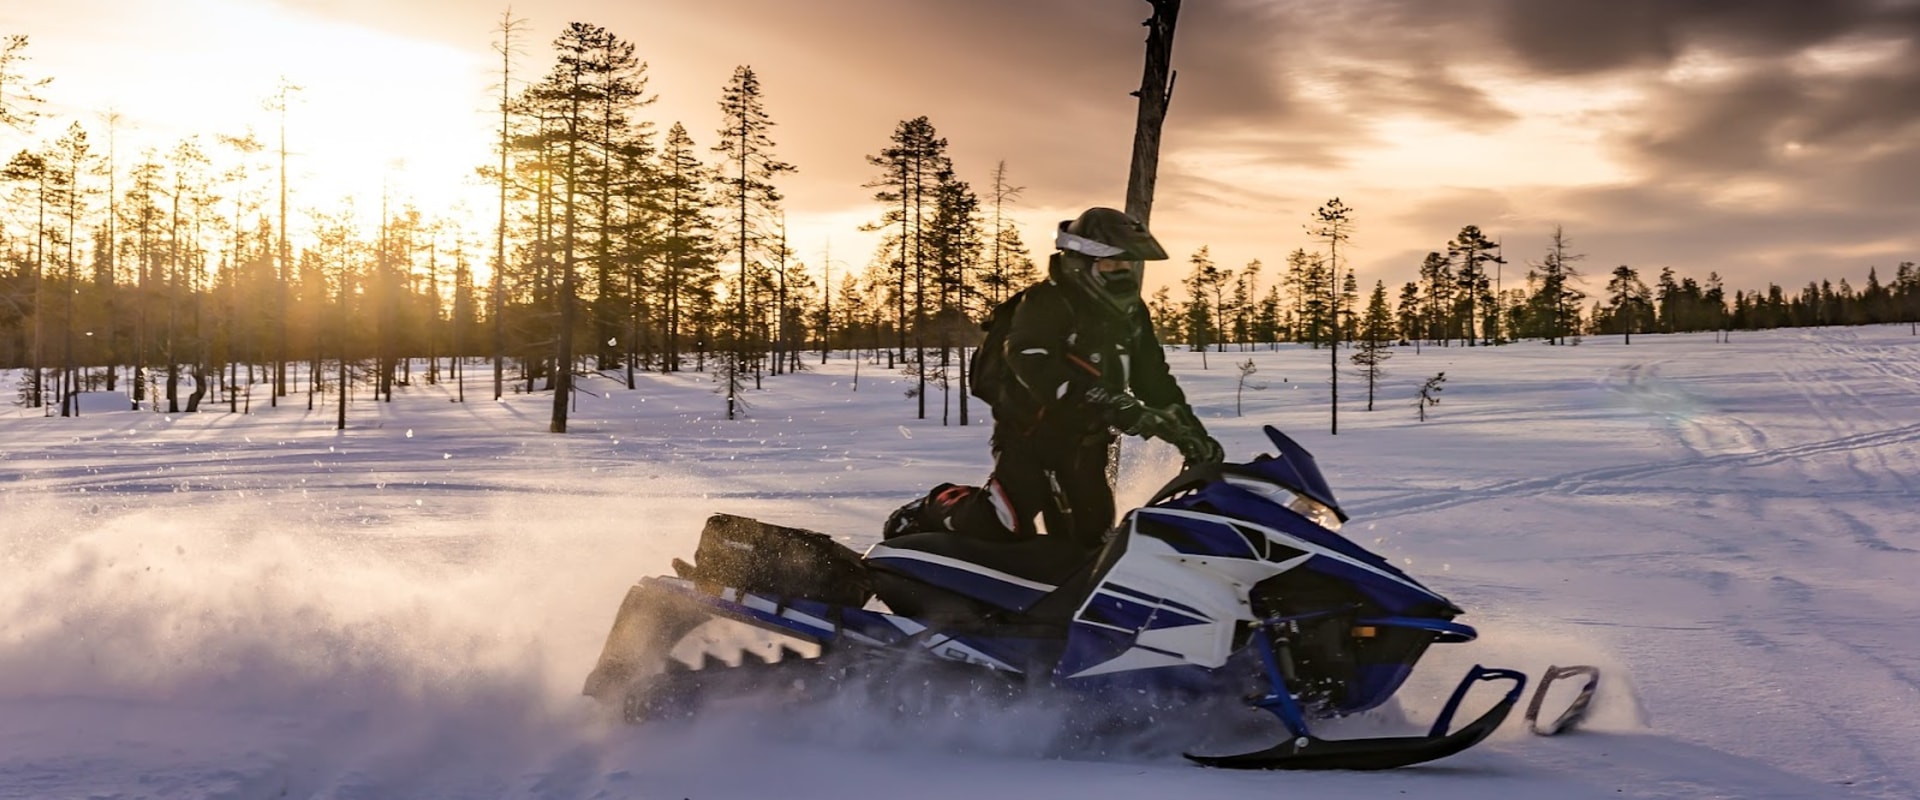 How fast does a 1000cc snowmobile go?